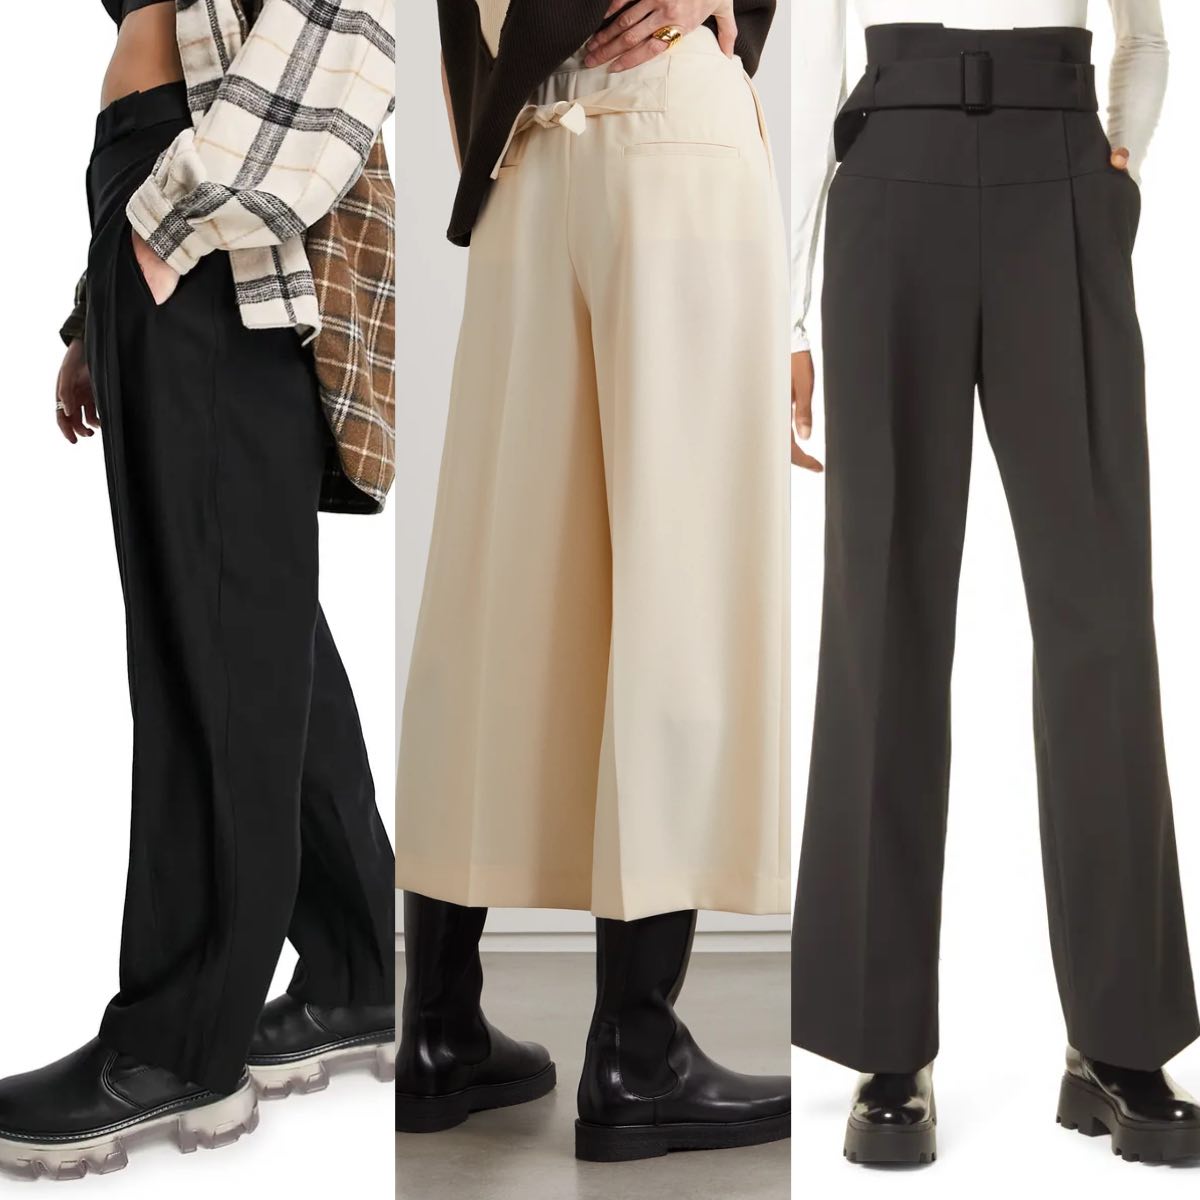 3 women wearing chunky chelsea boots with wide leg pants and trousers.